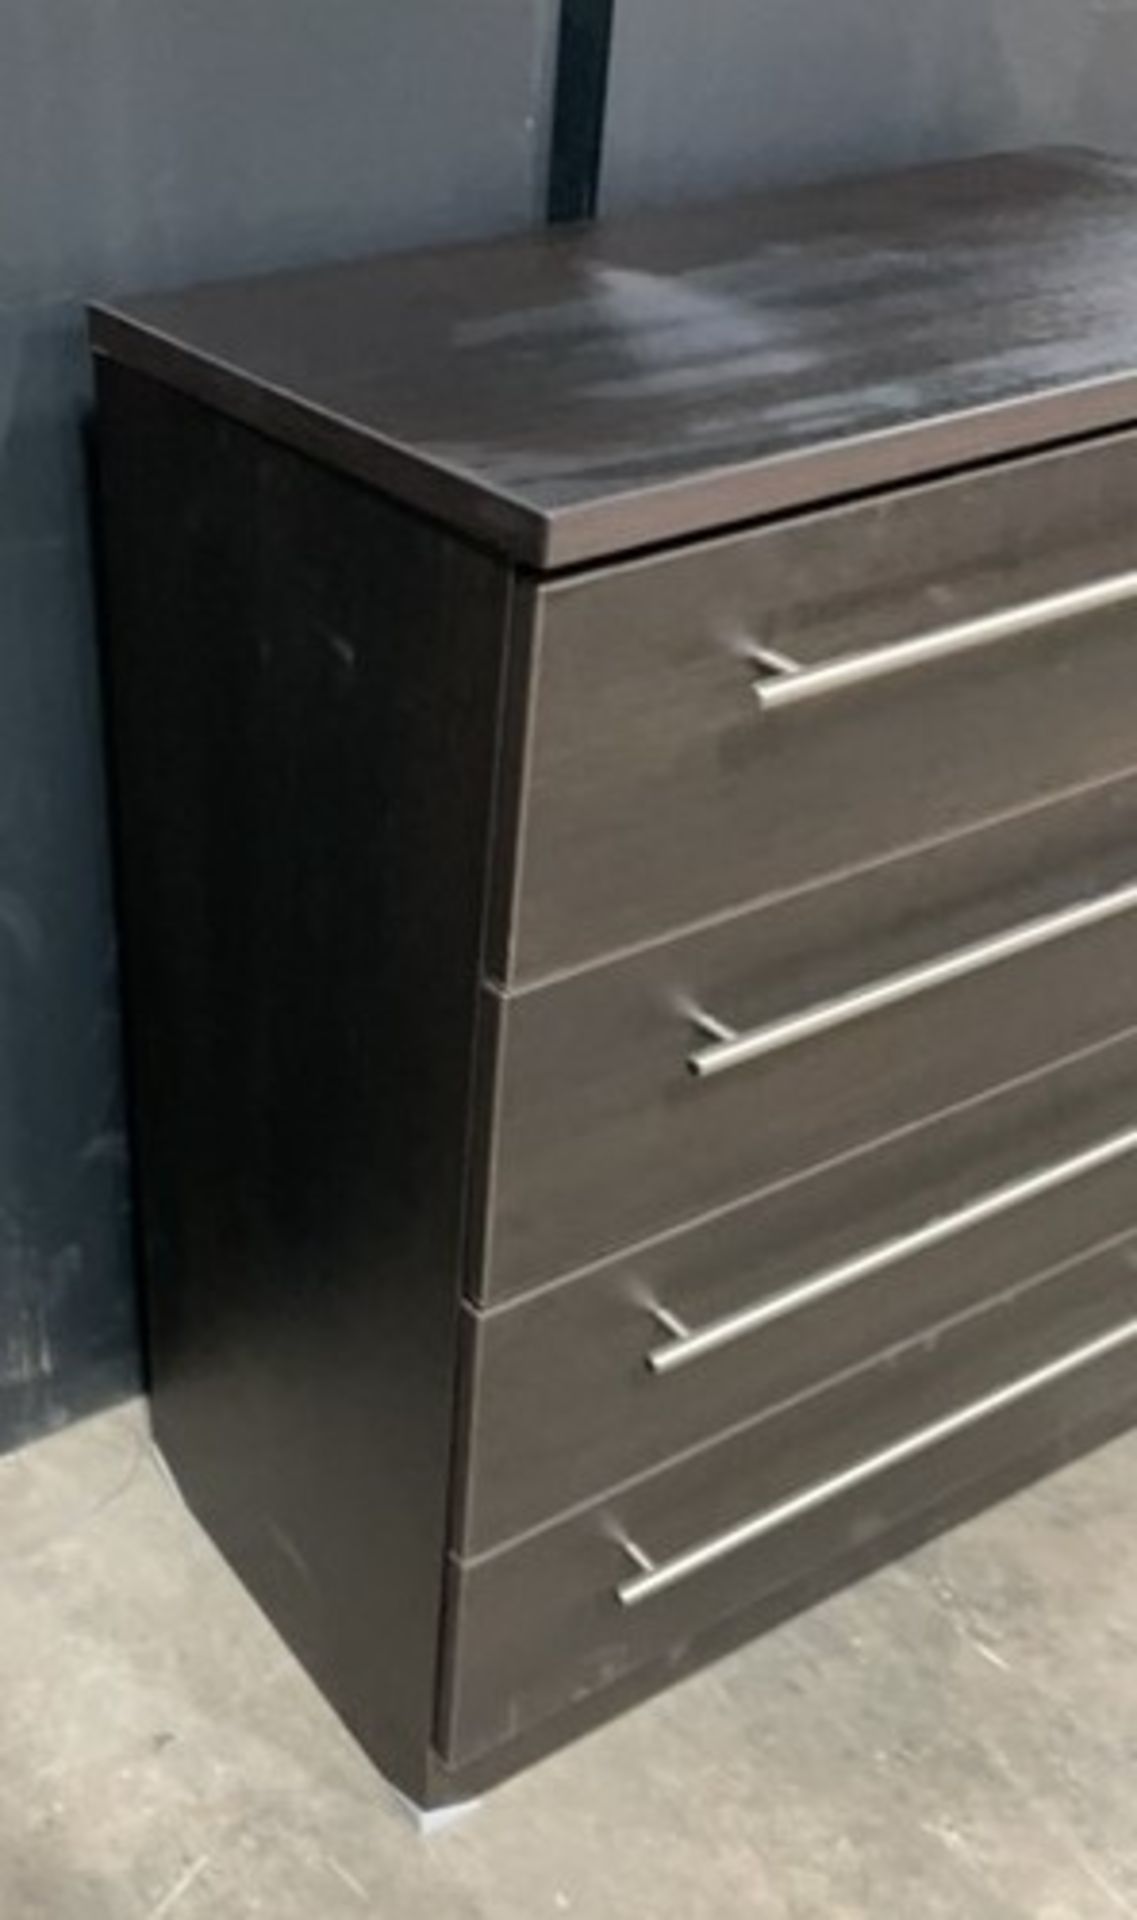 5 Drawer Chest of Drawers | Size: 88cm x 39cm x 64cm - Image 3 of 3